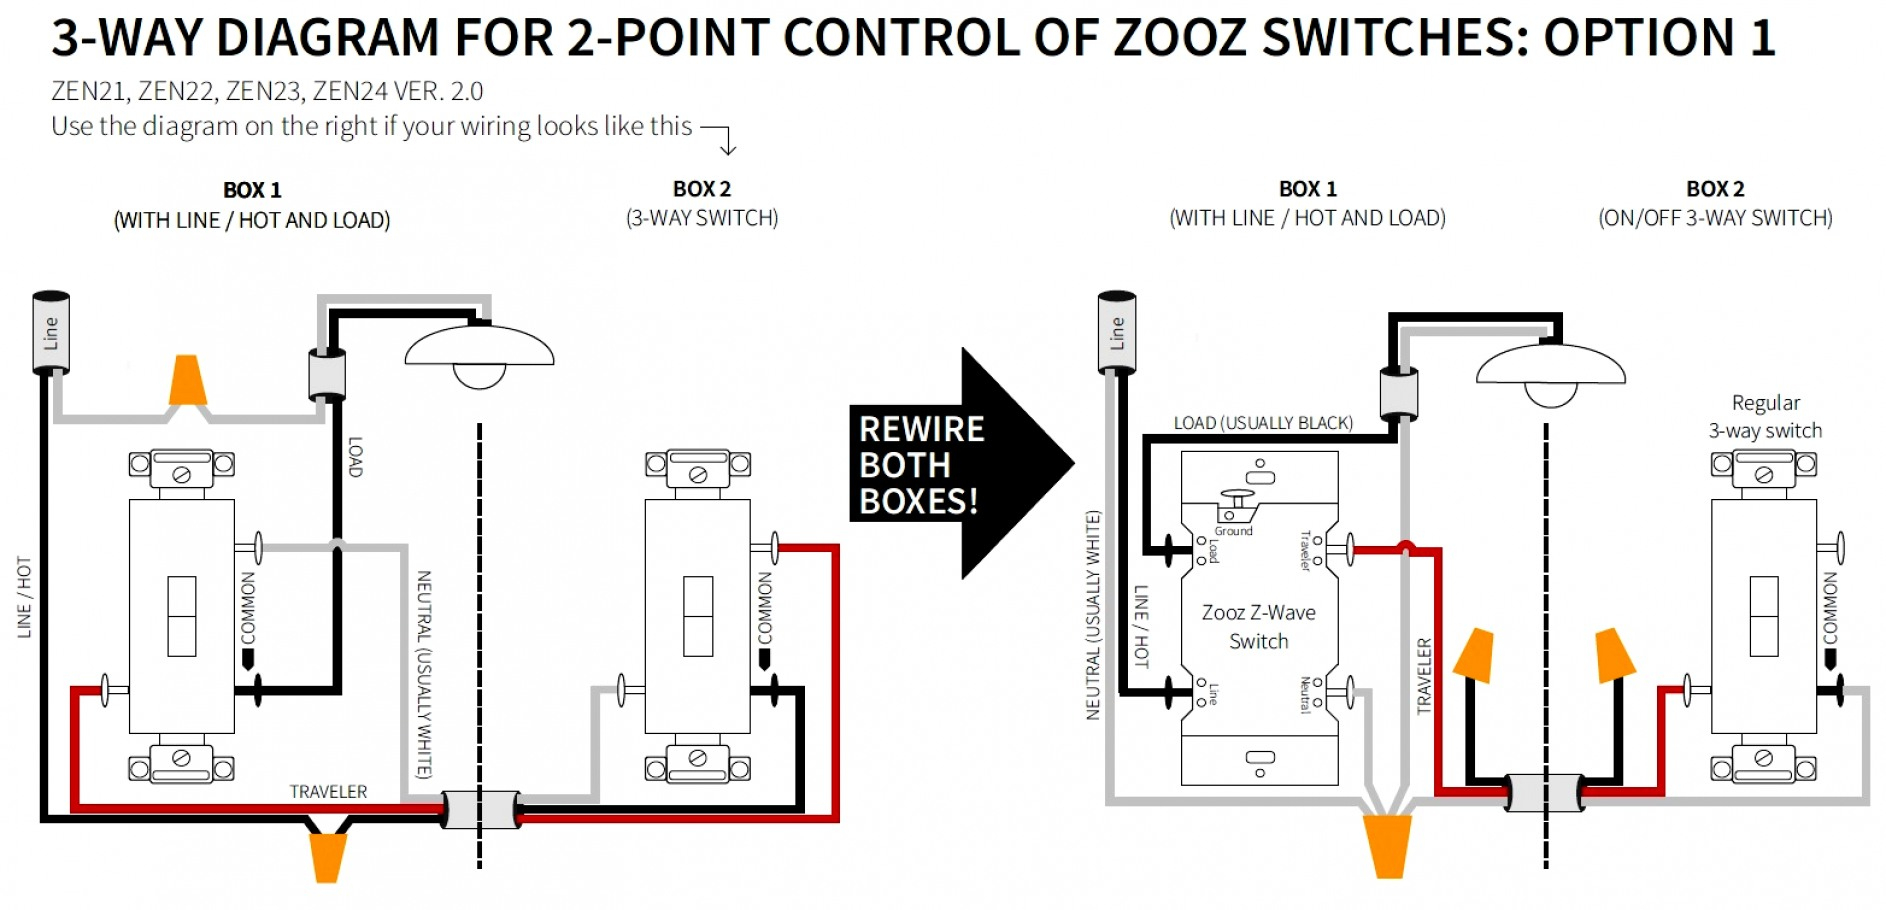 How To Wire A 3 Way Switch With Video - Wiring Diagram Name - Wiring Diagram For 3 Way Switch